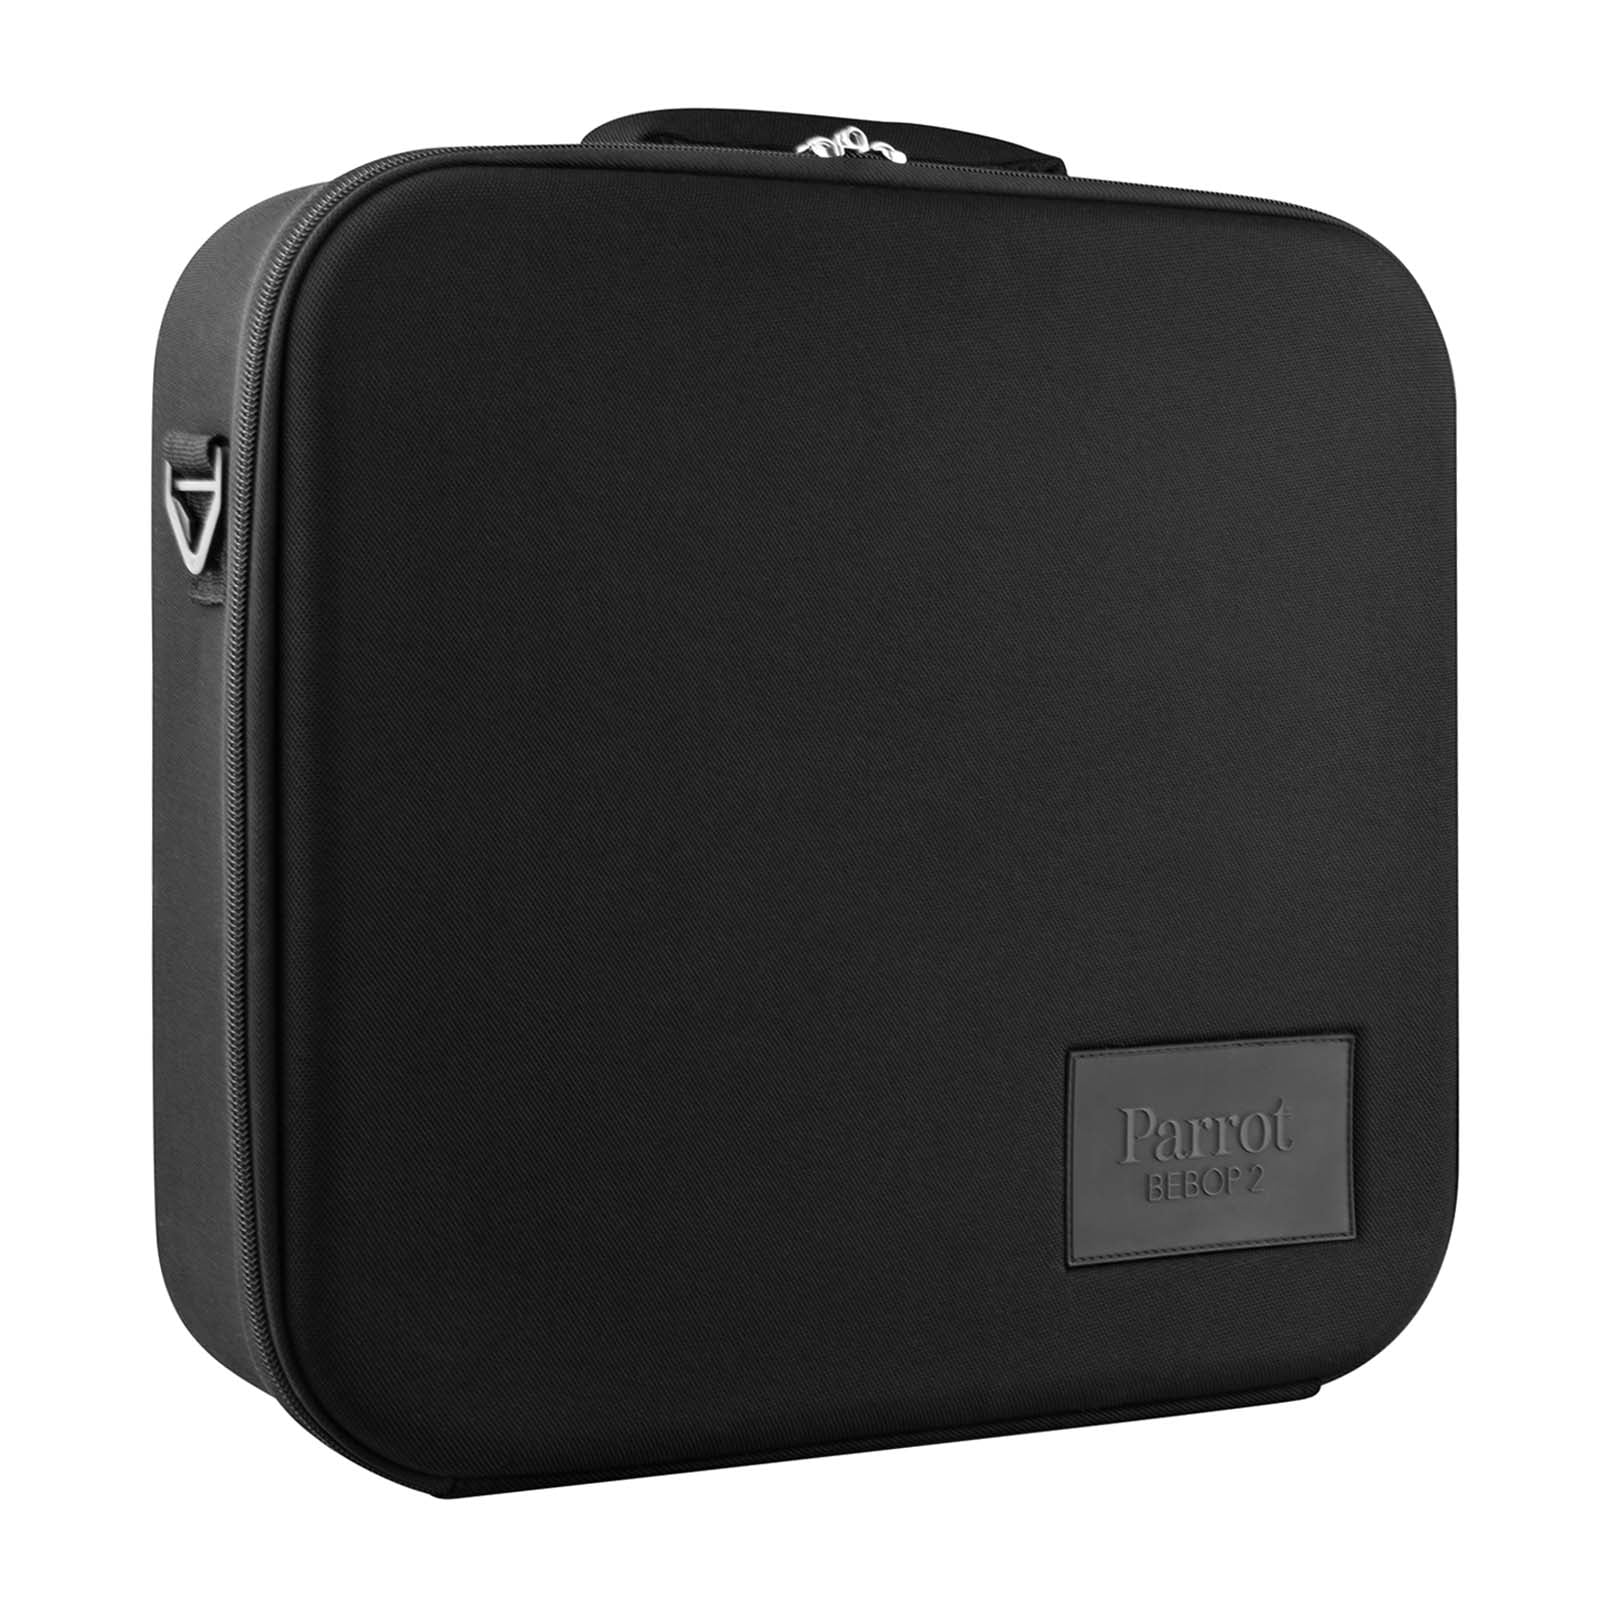 Hard Suitcase Storage Box Carrying Case for Parrot Bebop 2 Drone FPV Remote & VR